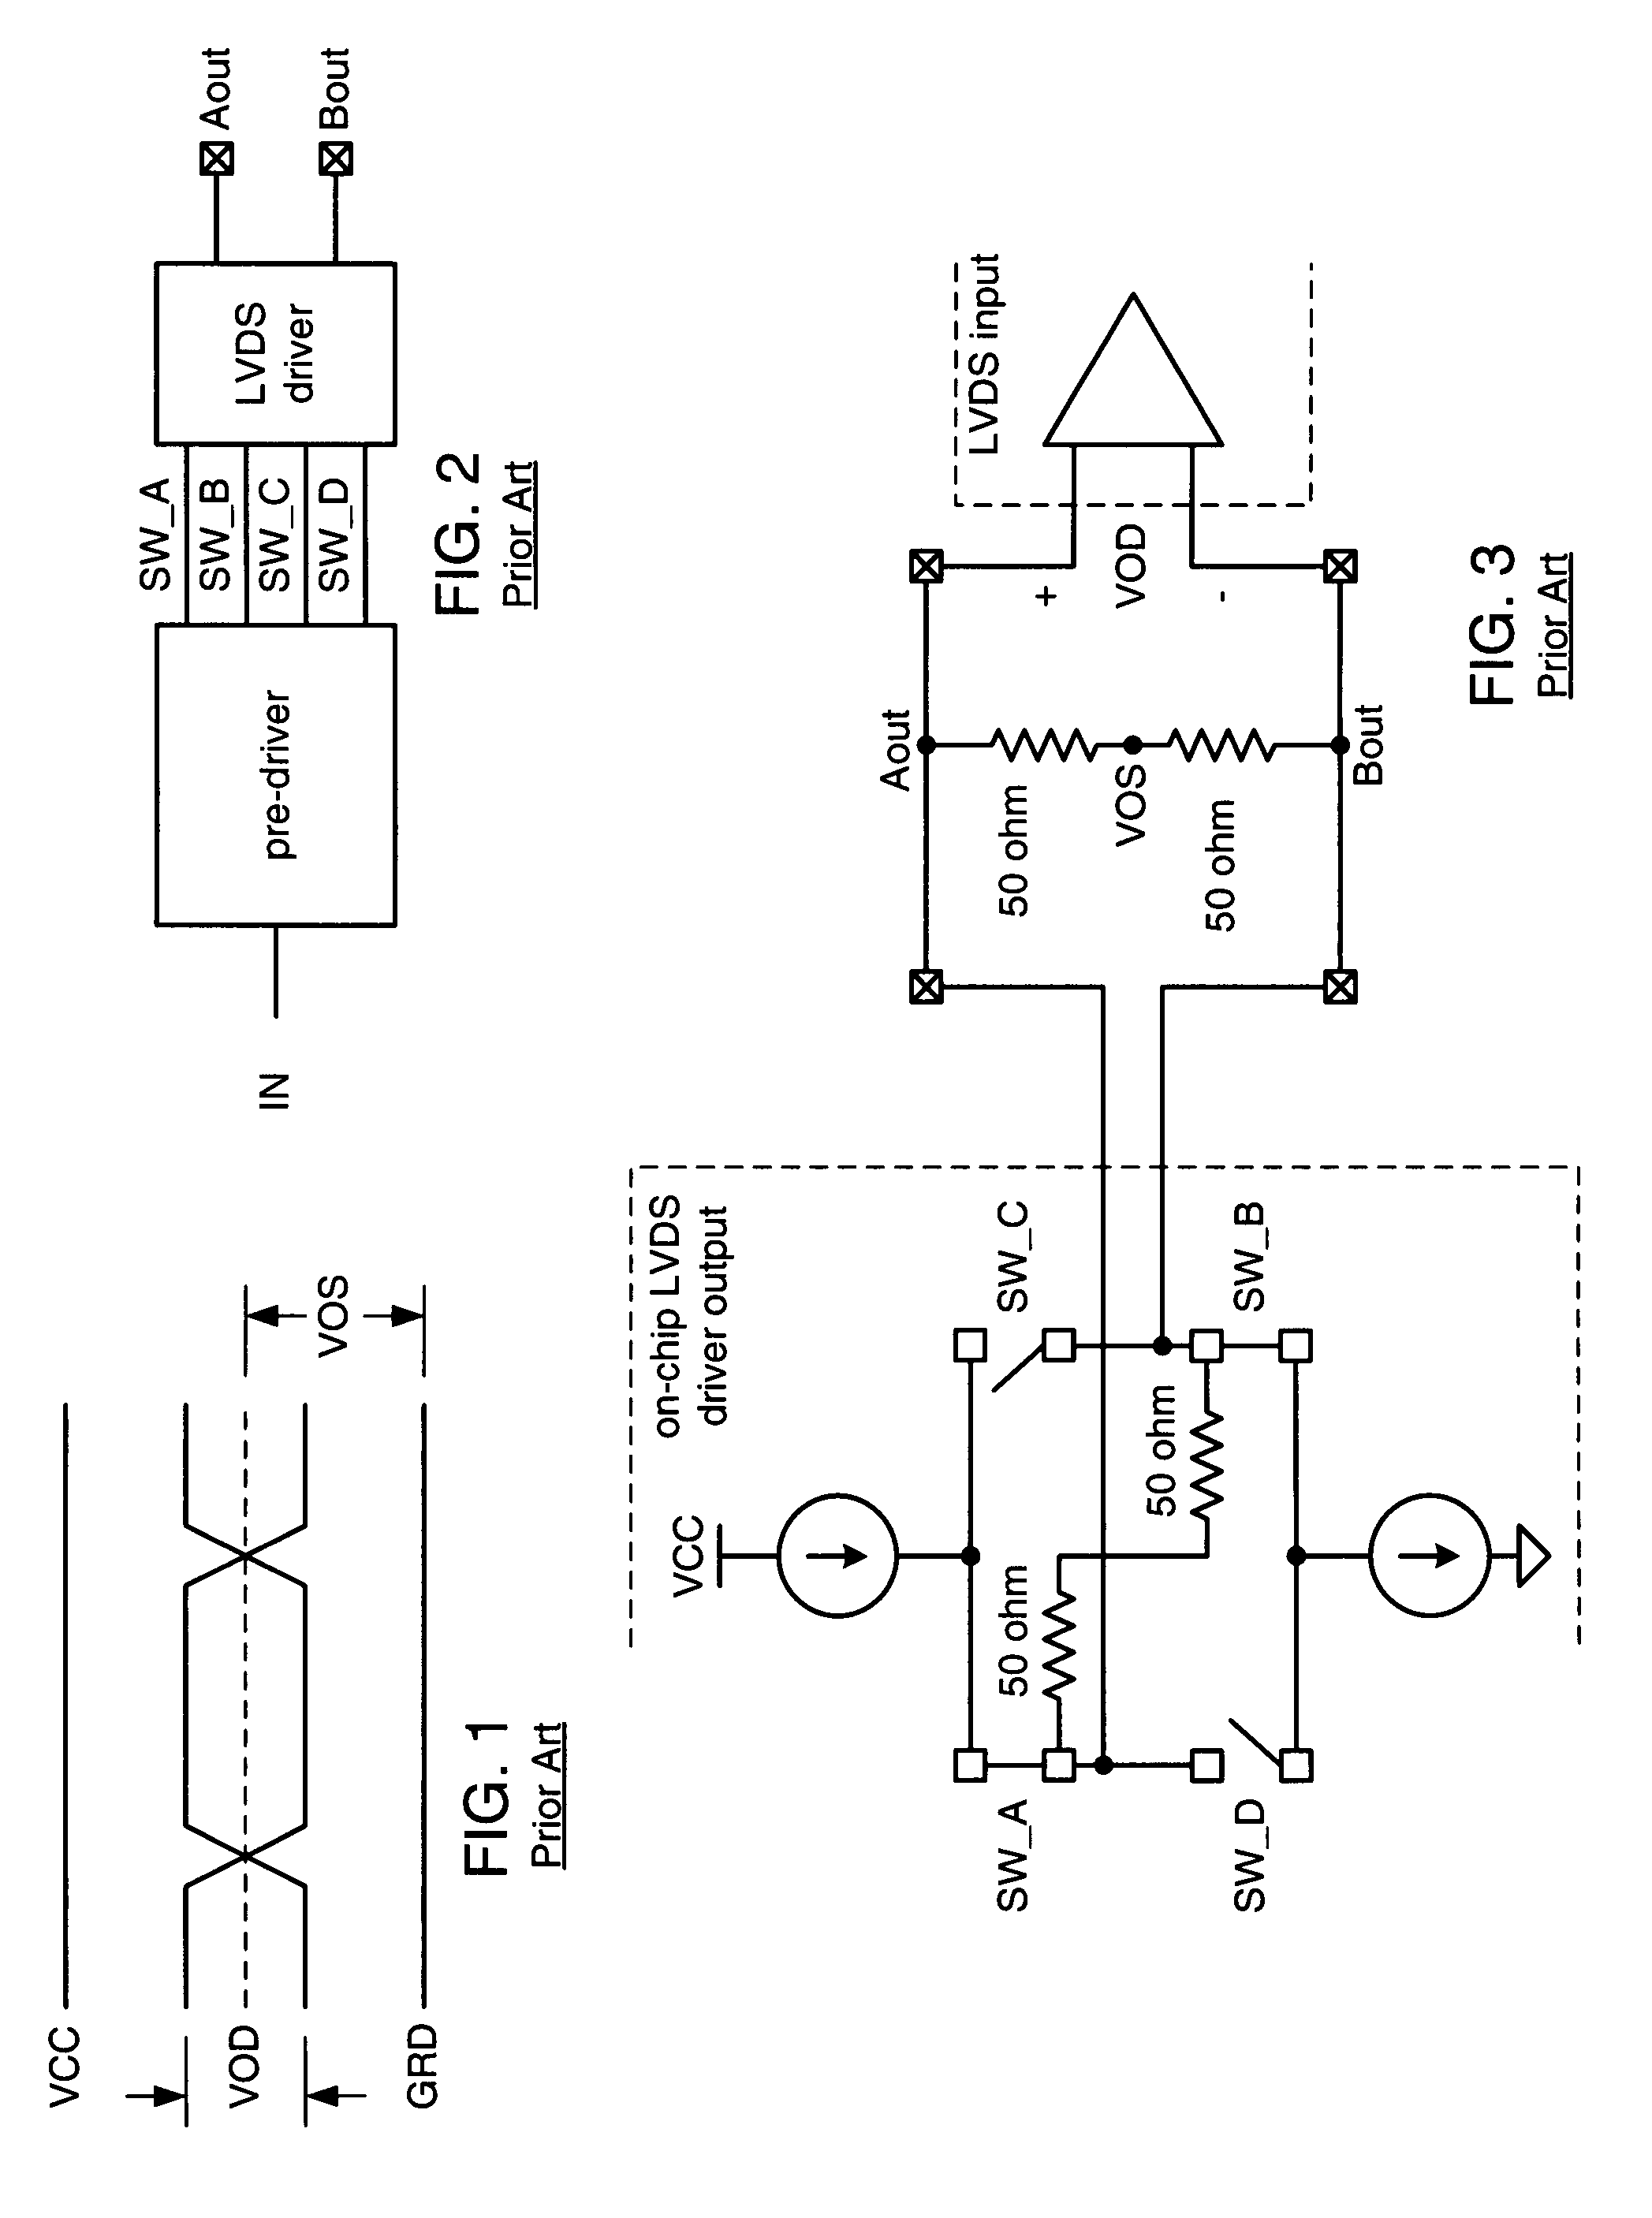 Programmable differential signaling system